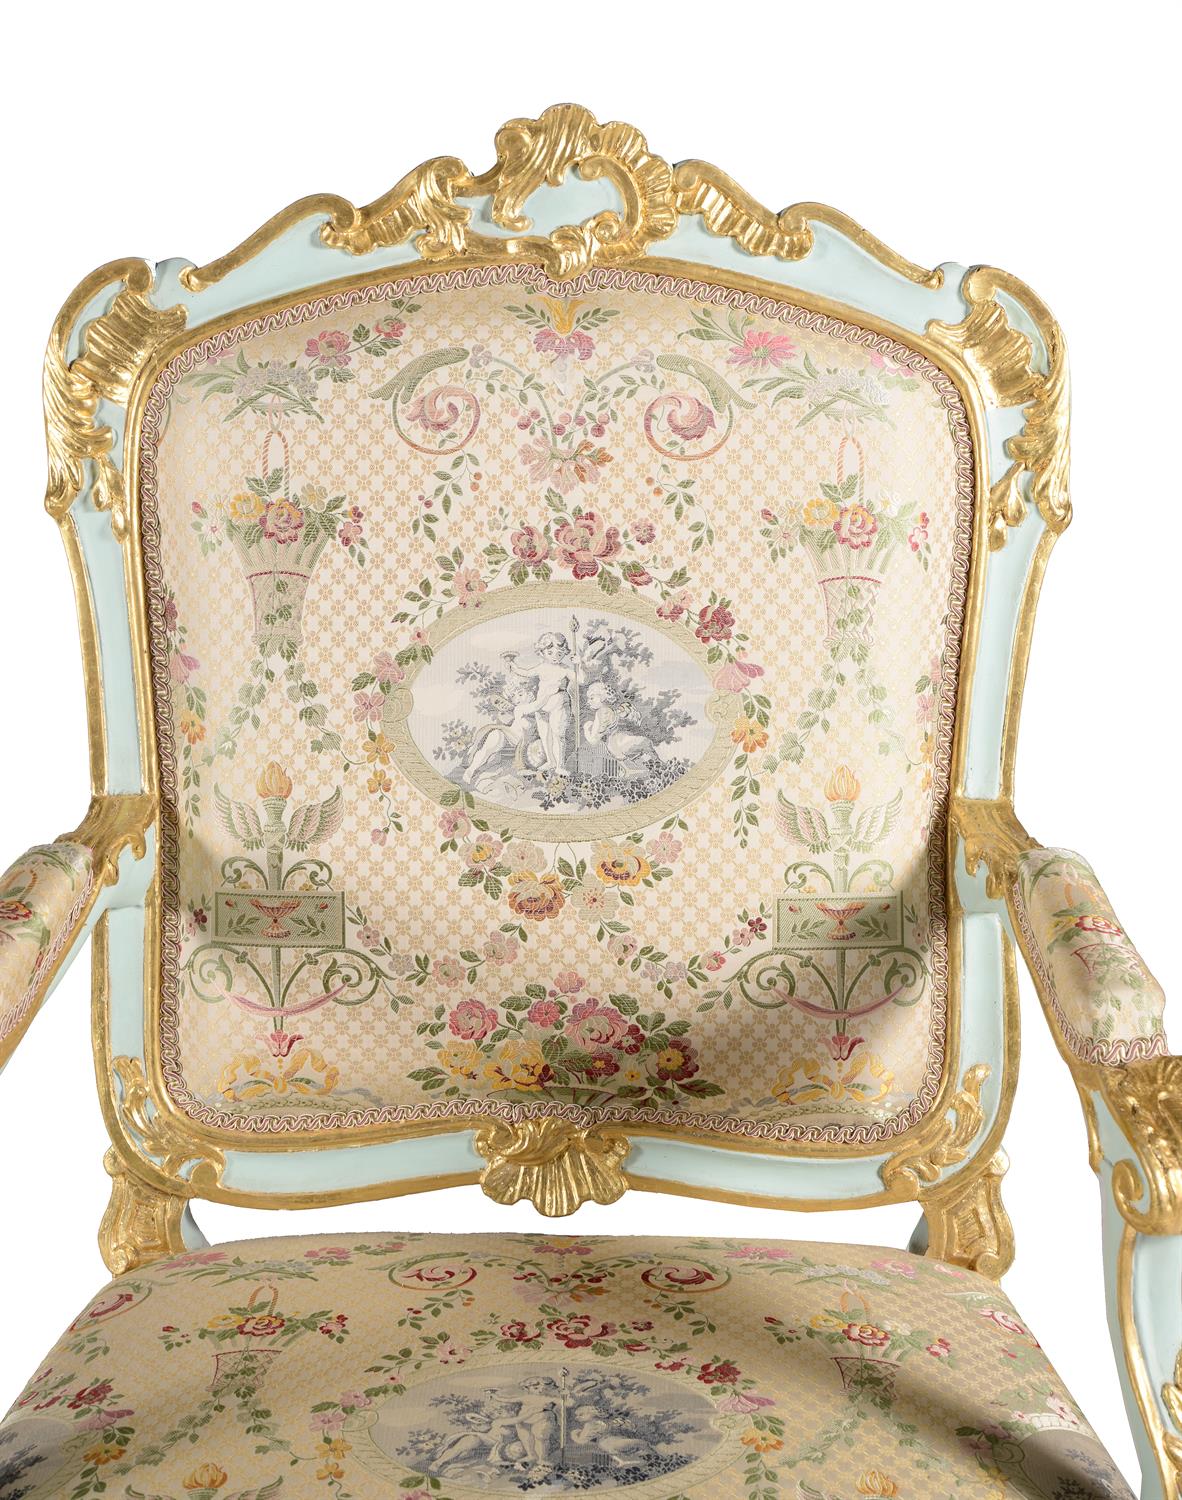 A pair of Italian carved wood, painted and parcel gilt armchairs, mid 18th century - Image 2 of 8